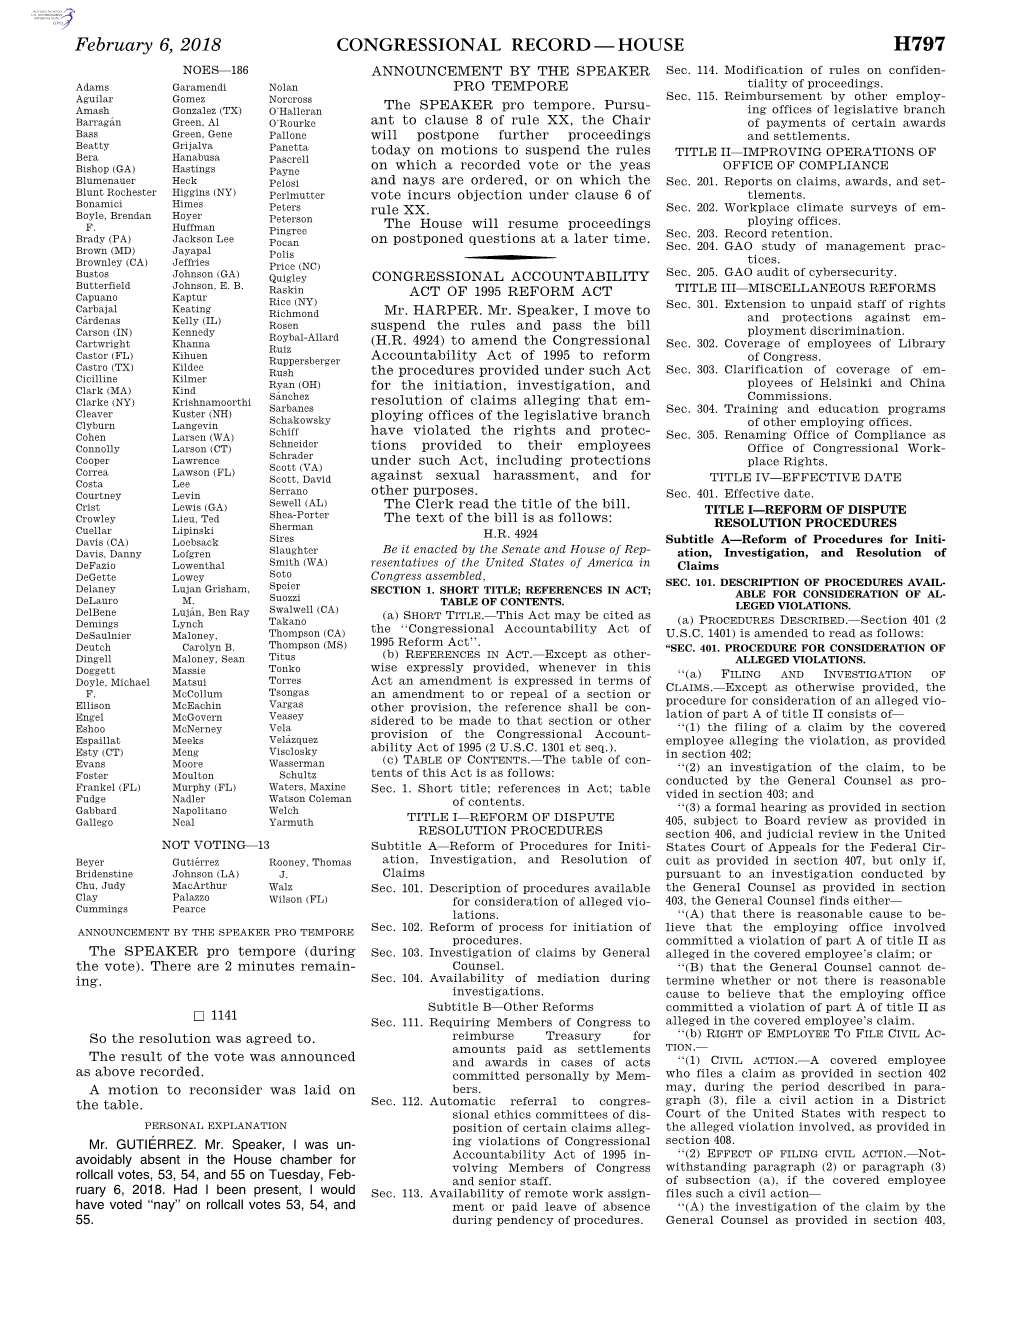 Congressional Record—House H797